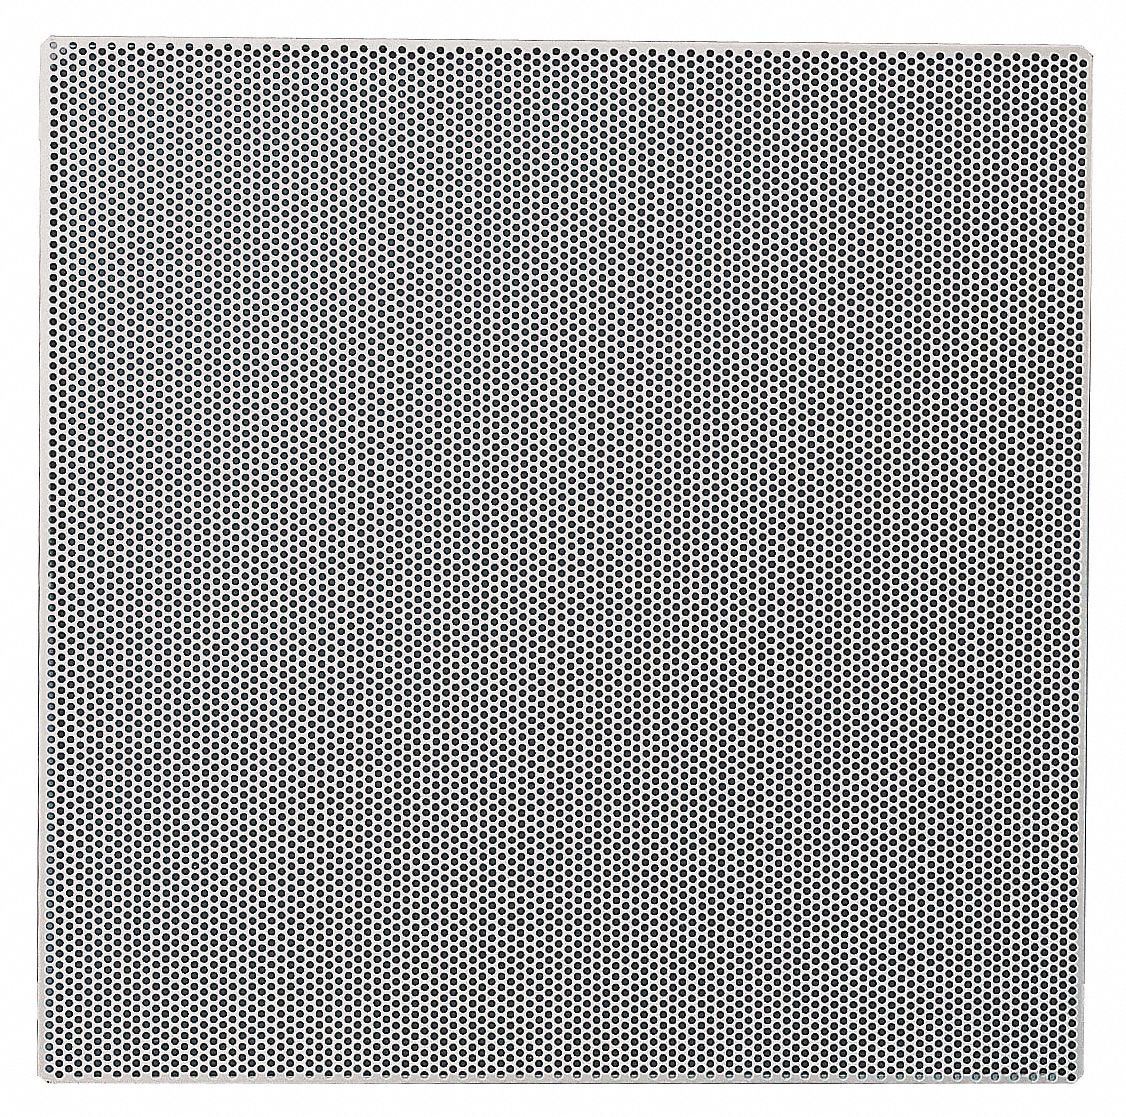 AMERICAN LOUVER STR-PERF-2238-2PK Square Perforated Ceiling Tile Diffuser White 